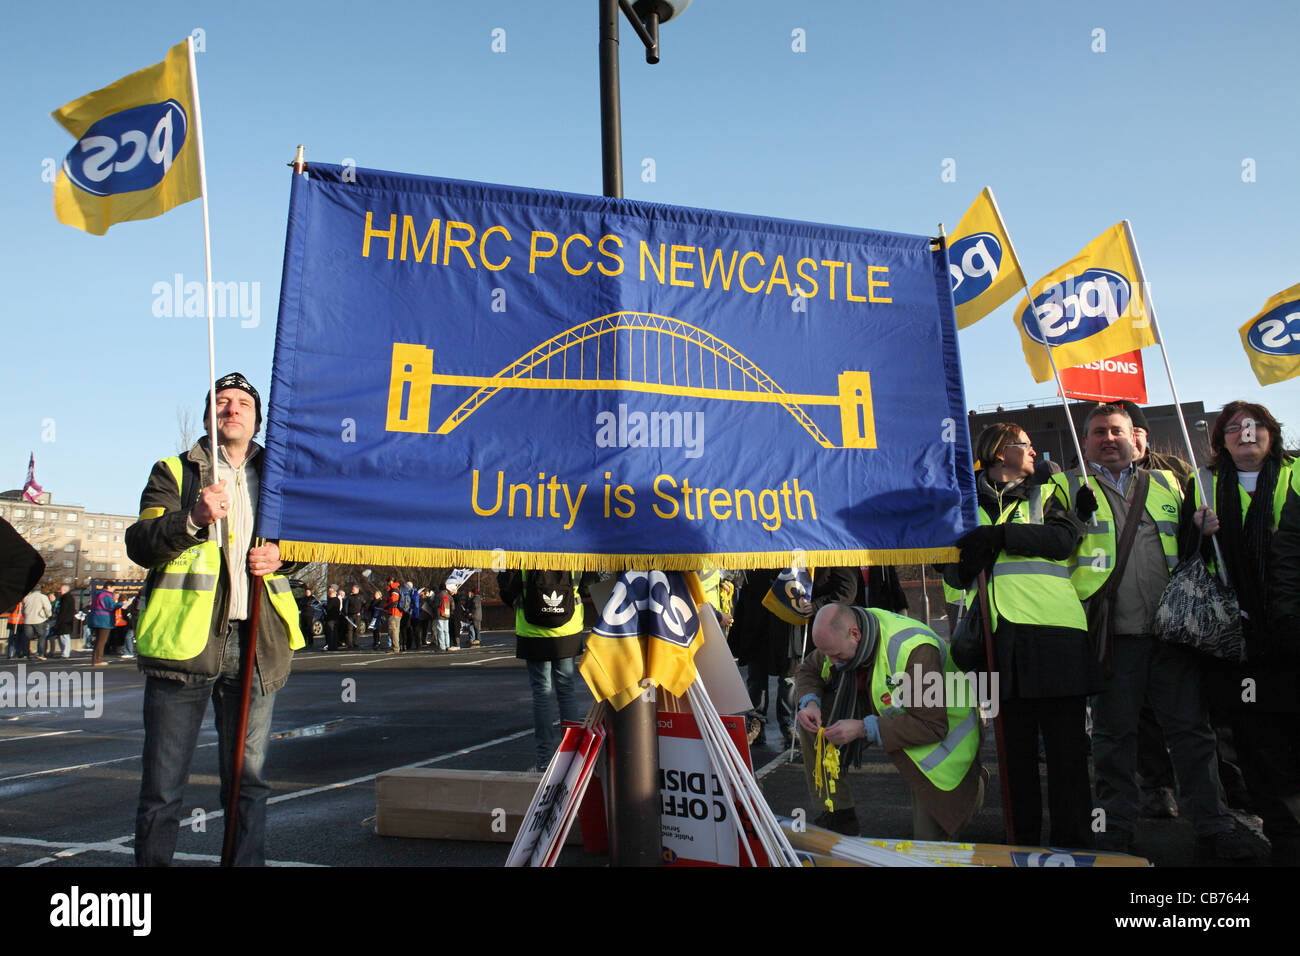 Striking workers hold HMRC PCS banner and flags, TUC day of action Gateshead, north east England, UK Stock Photo